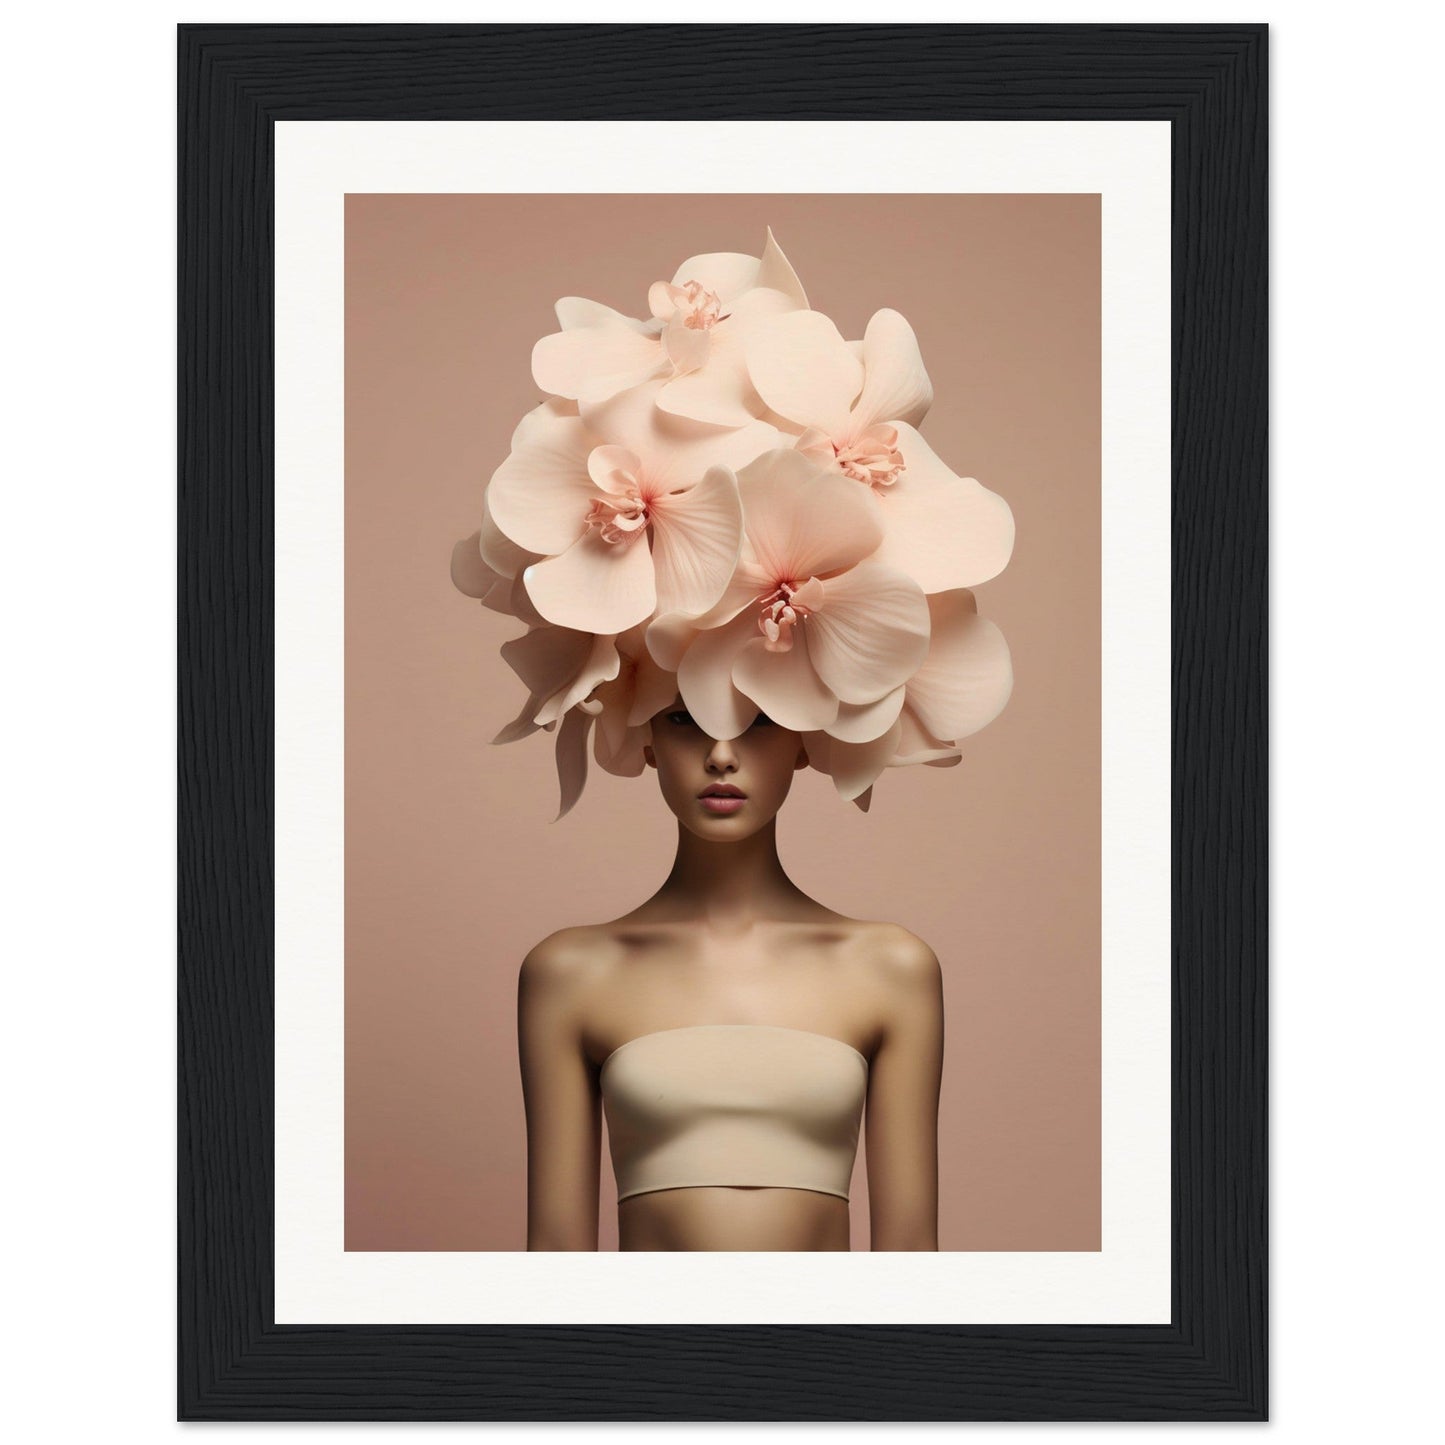 Flower head #14 the oracle windows™ collection - 15x20 cm /